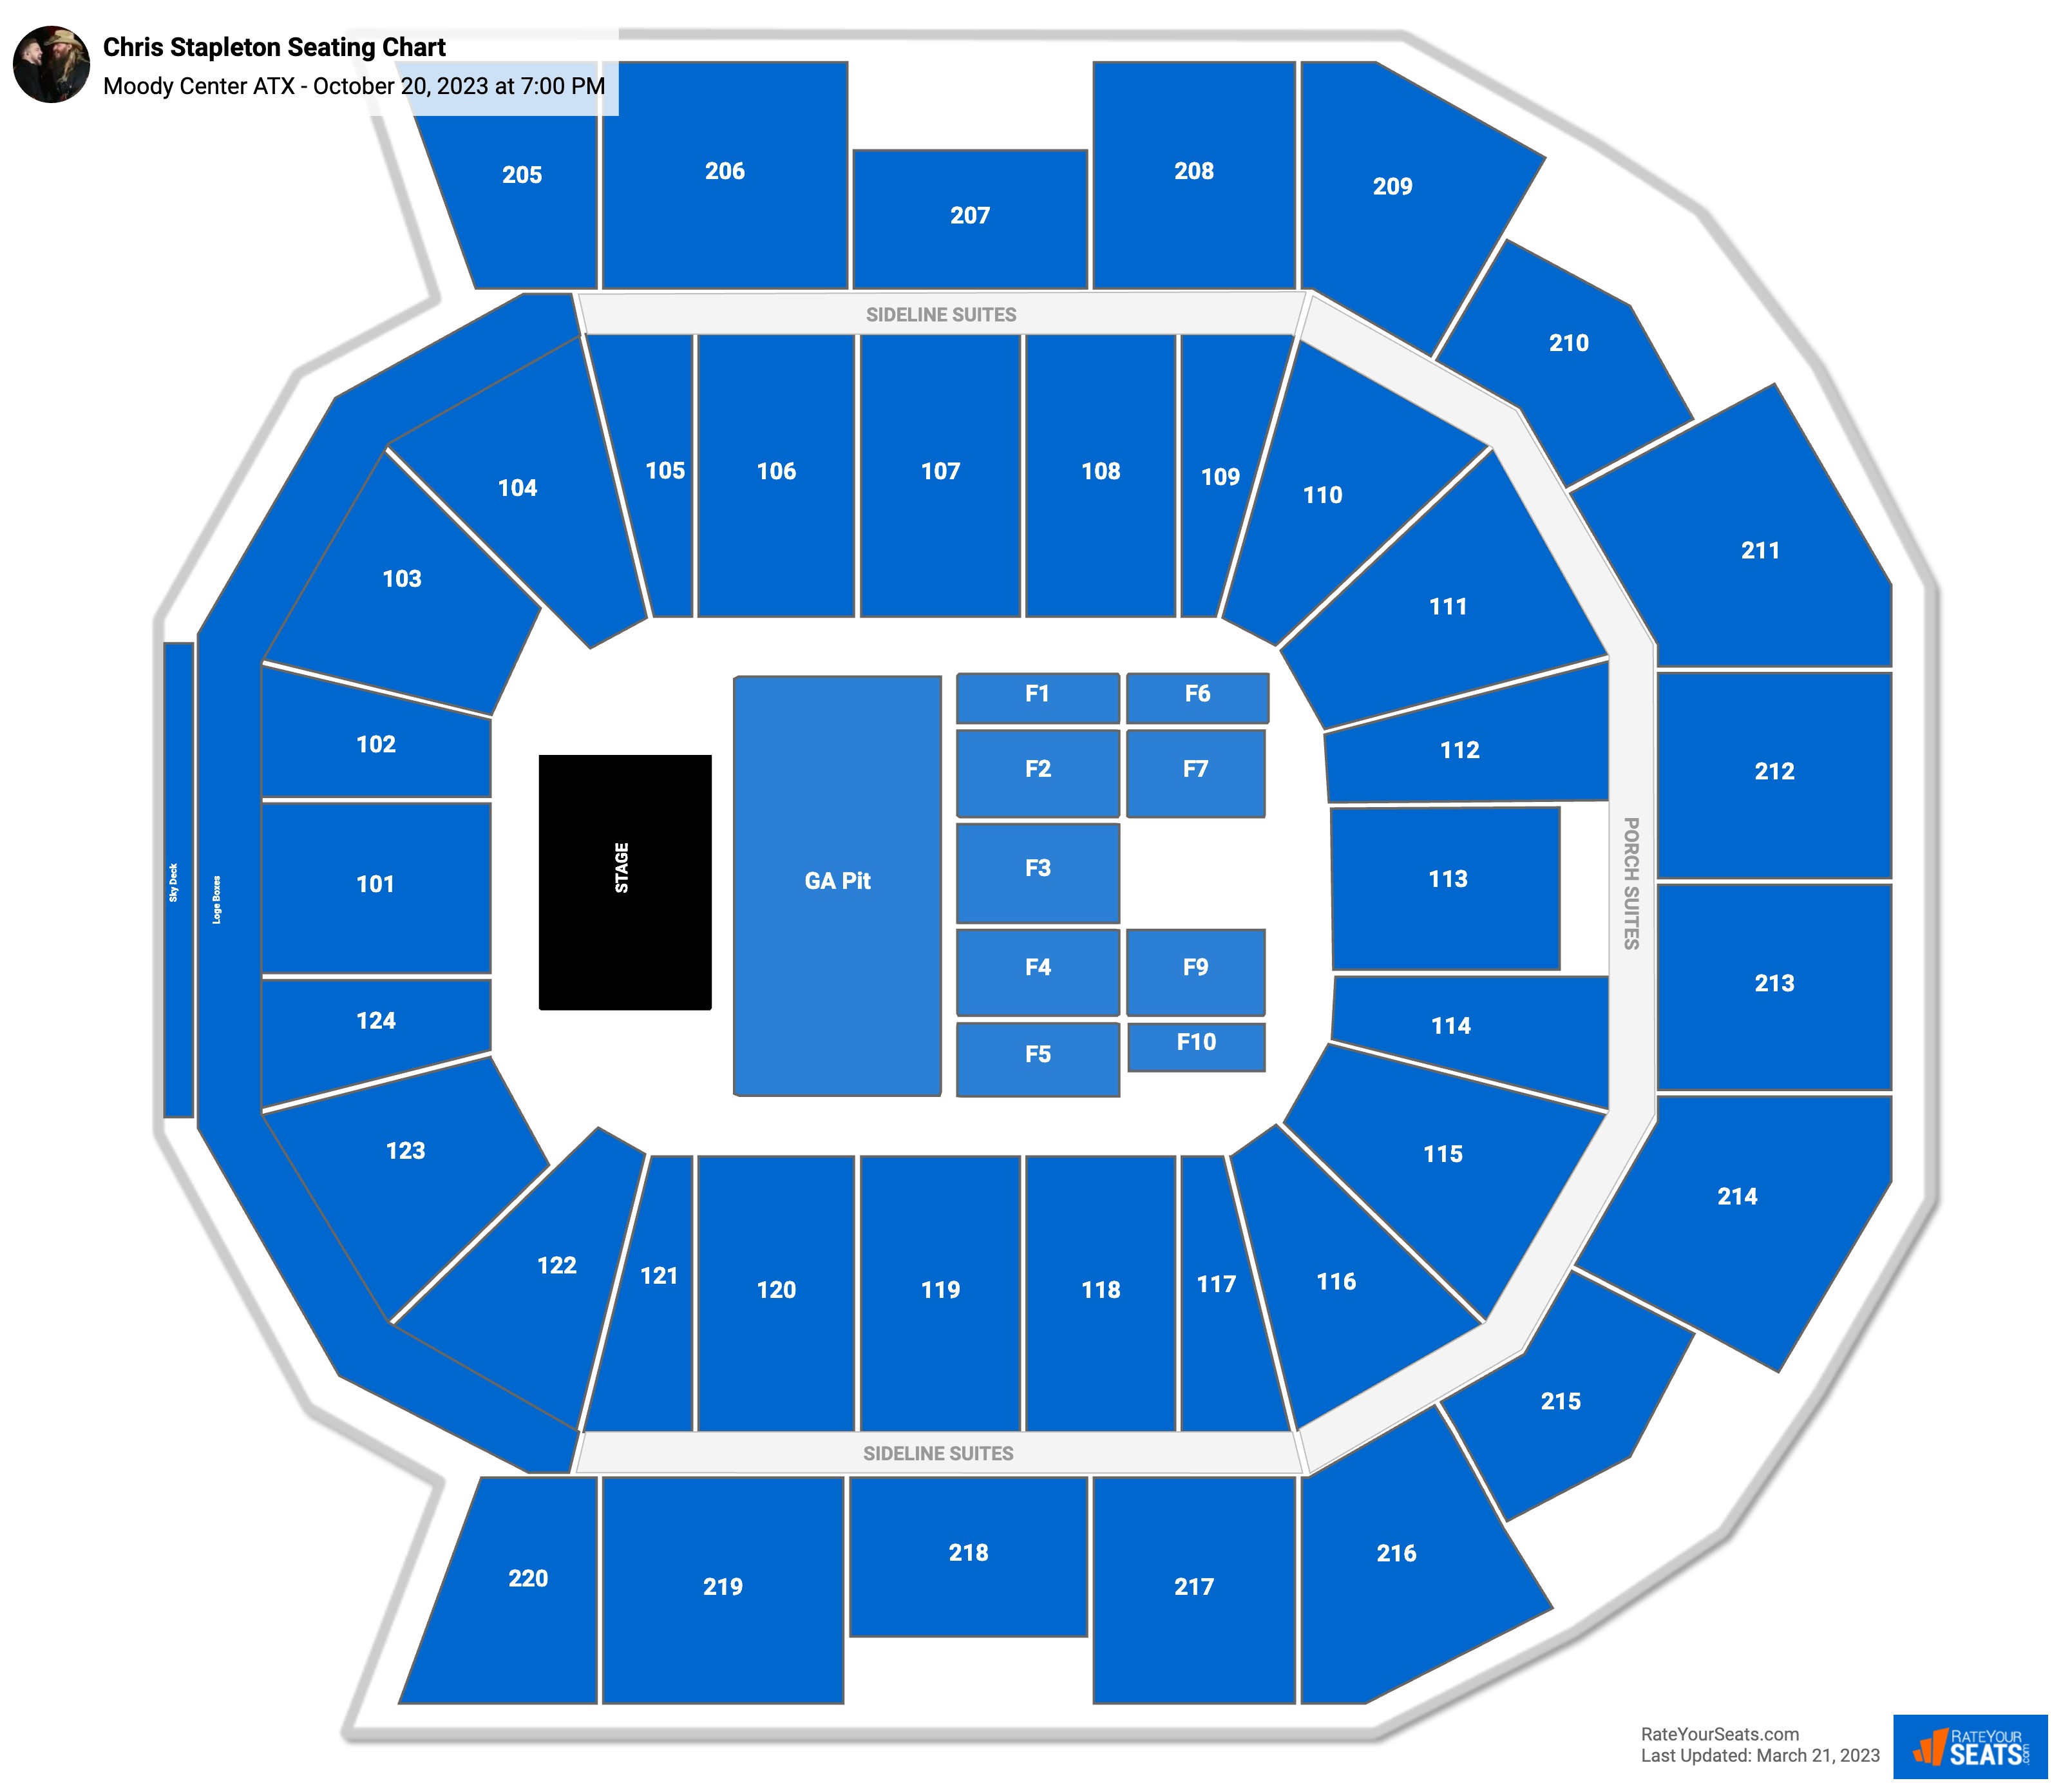 Moody Center ATX Concert Seating Chart